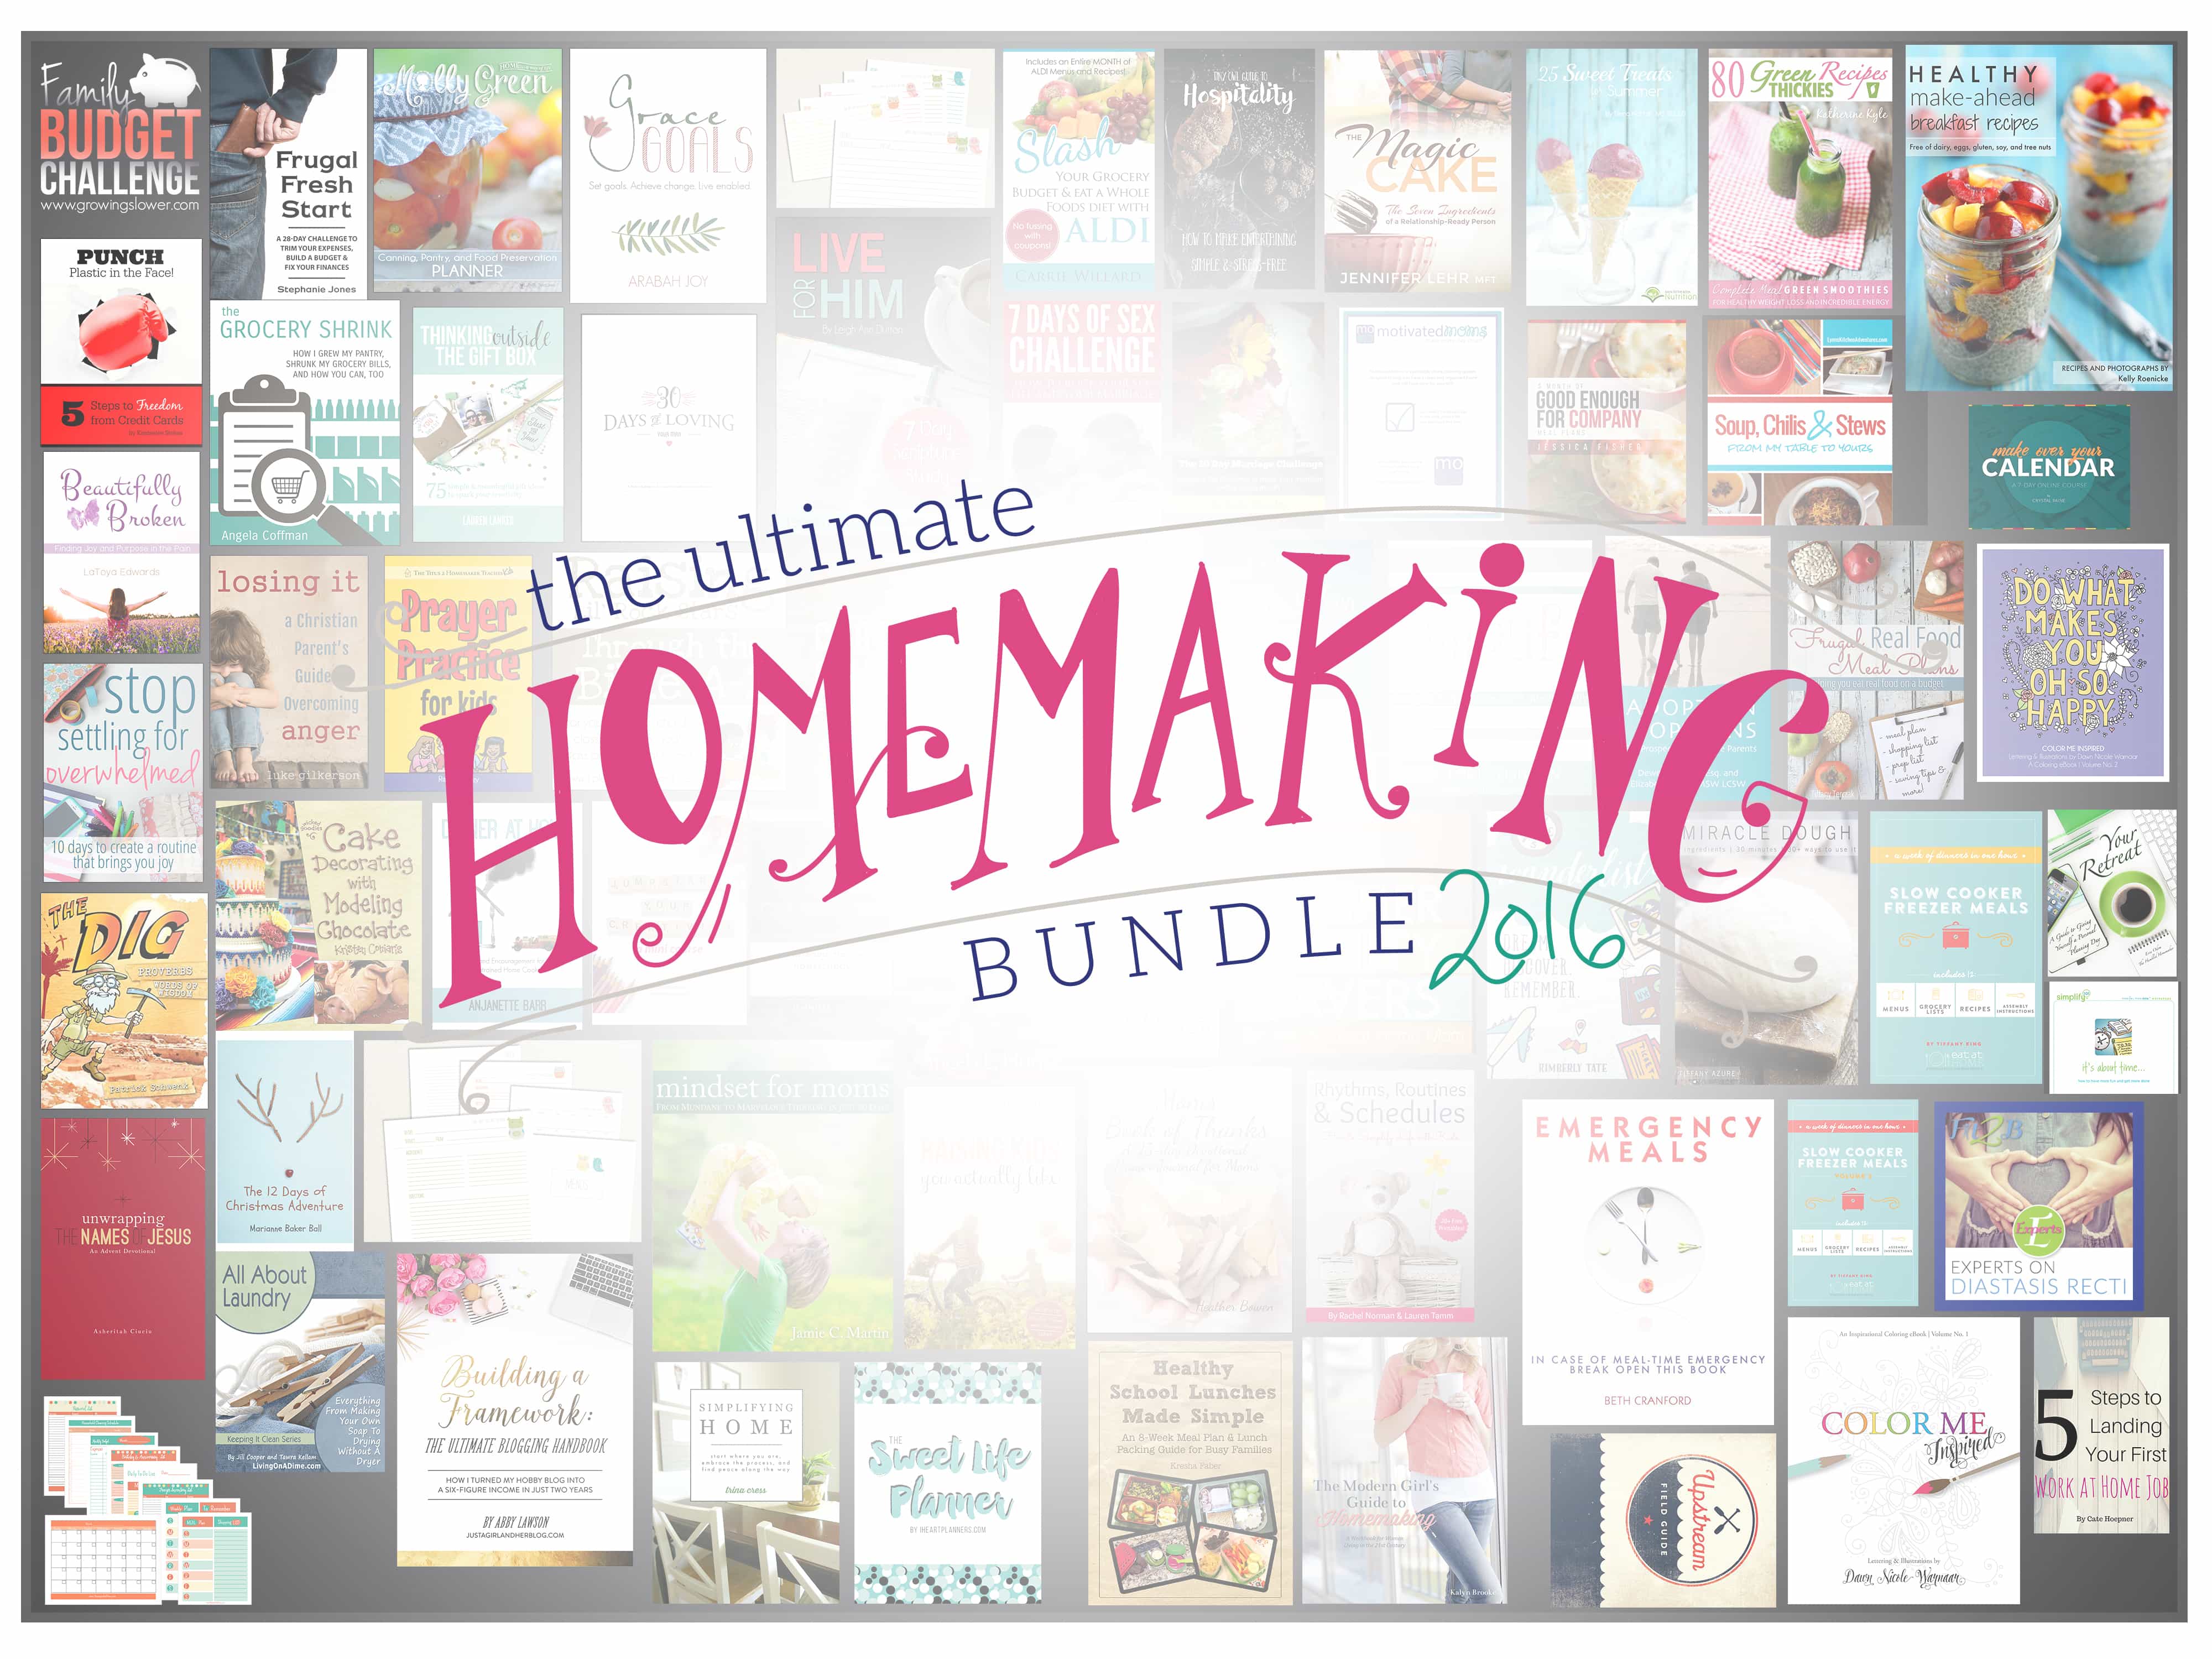 93 Homemaking and Mothering Resources